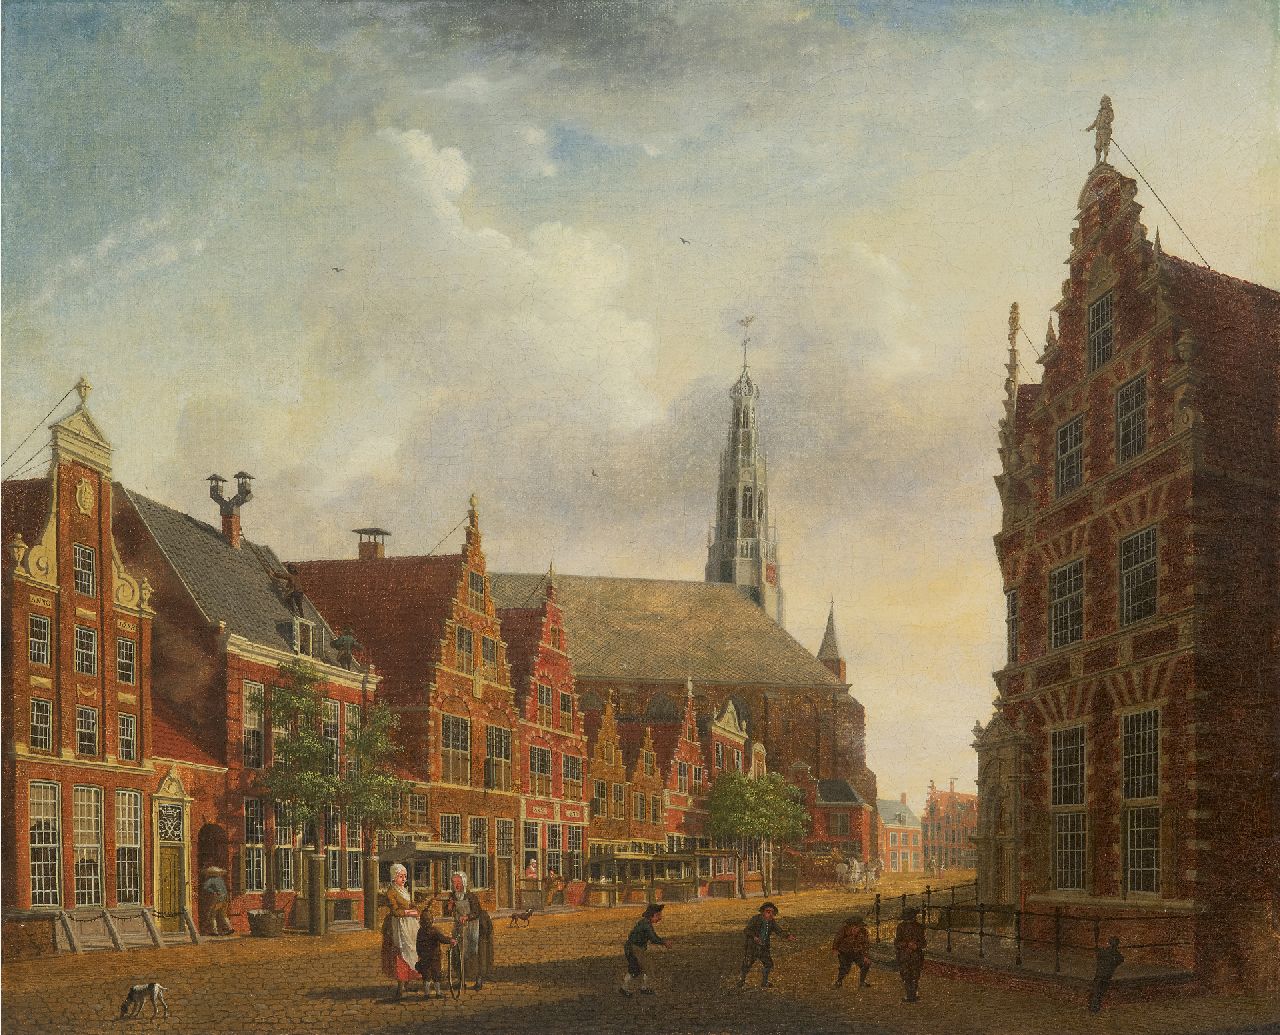 Ouwater I.  | Isaac Ouwater, View of the Nieuwstraat in Hoorn, oil on canvas 36.7 x 43.8 cm, signed l.r. and dated 1785